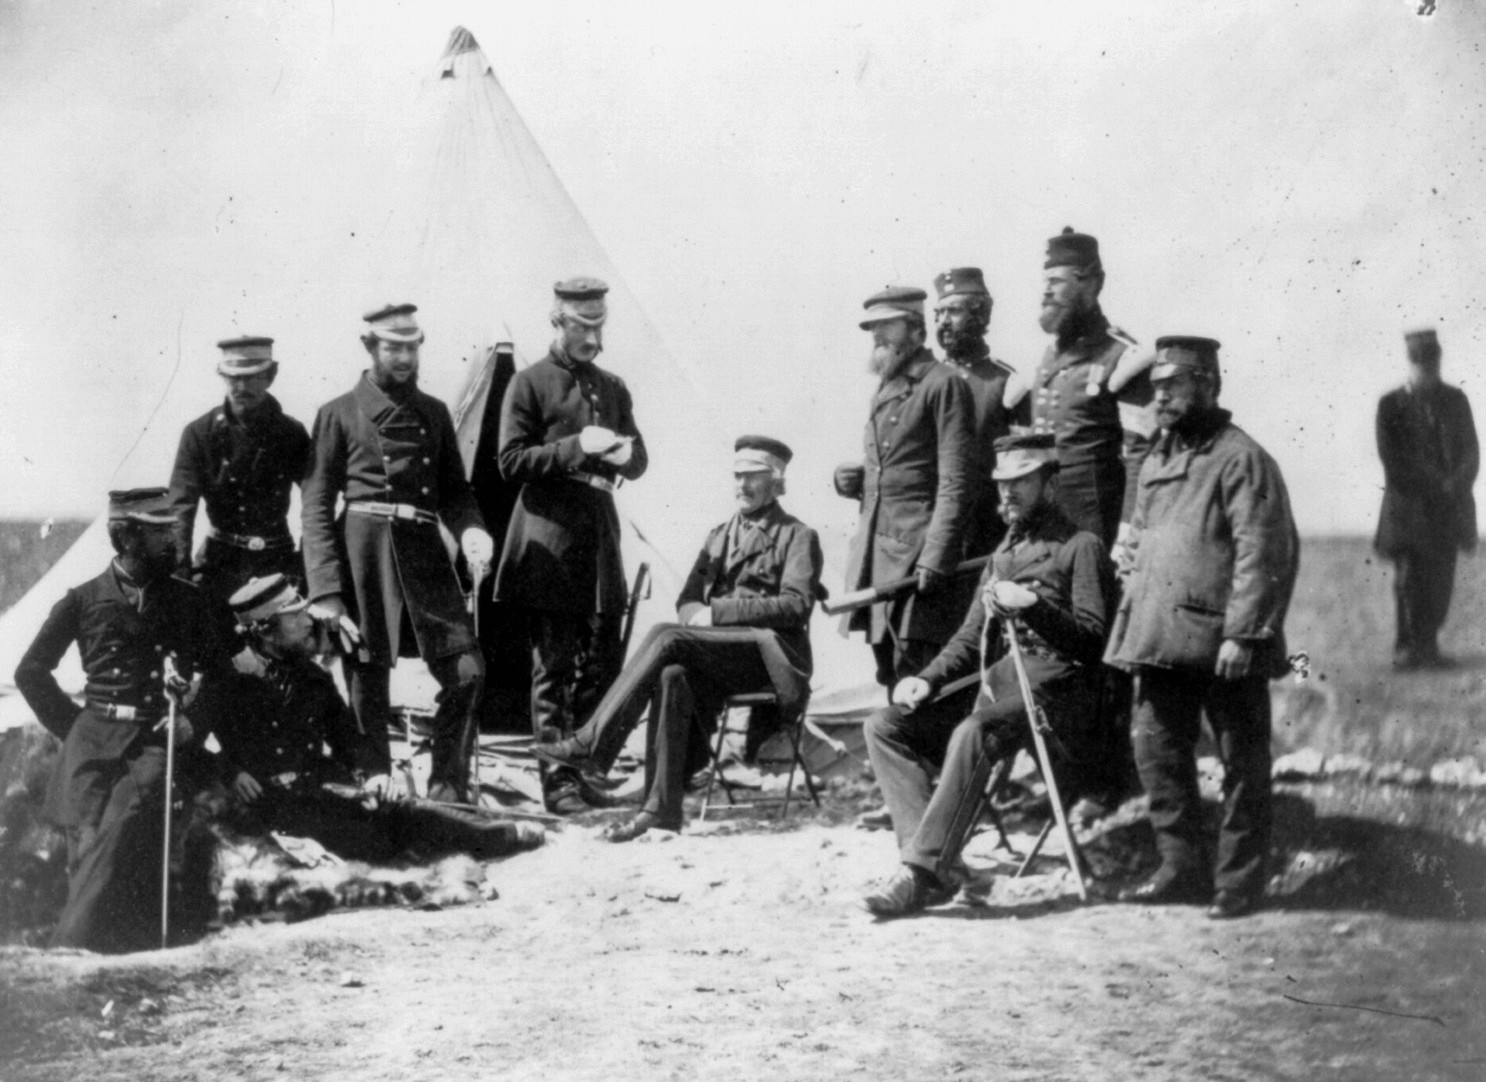 Hard-fighting Brig. Gen. John L. Pennefather (center) commanded 3,000 men of the British 2nd Division during the bloodletting at the Home Ridge.